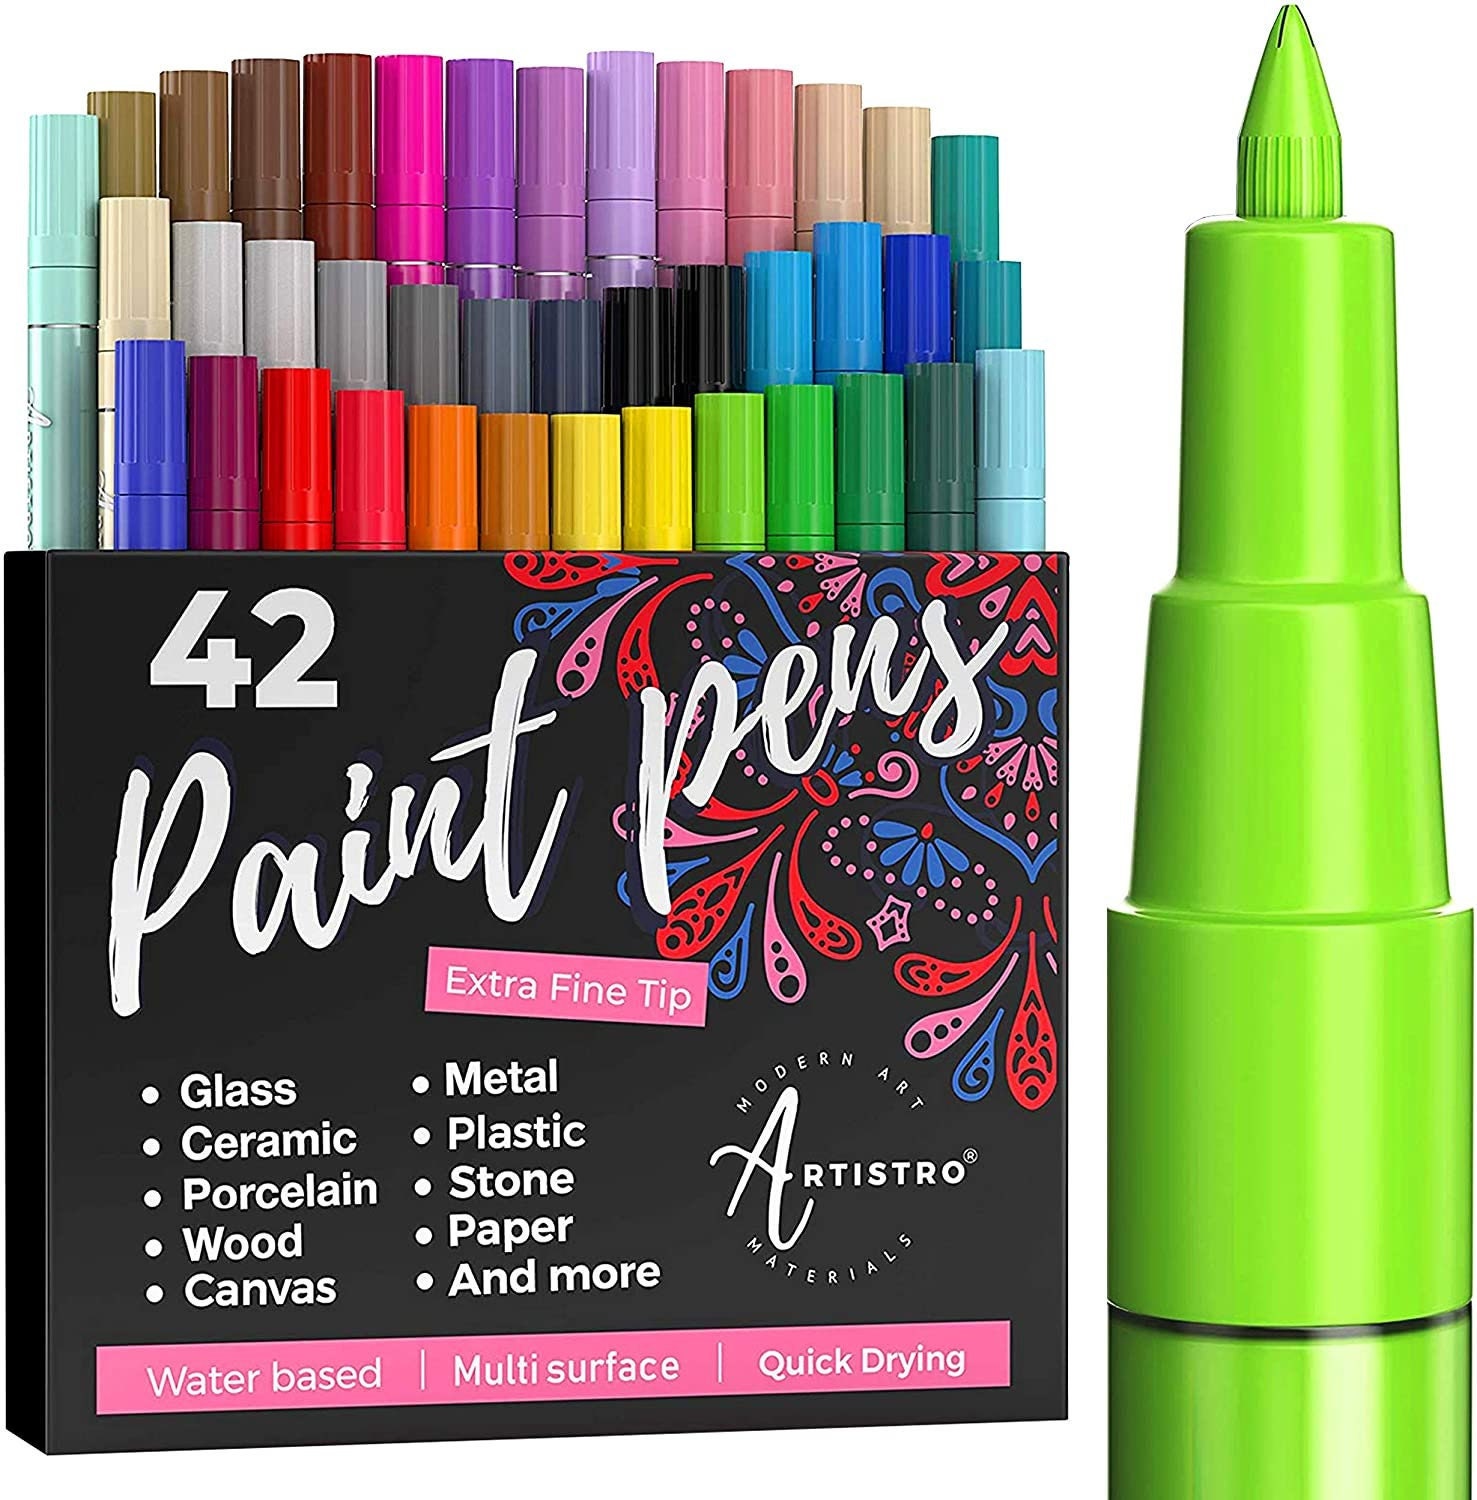 15 Acrylic Paint Pens extra-fine Tip for Rock Painting, Stone, Ceramic,  Glass, Wood, Fabric, Canvas, Metal 